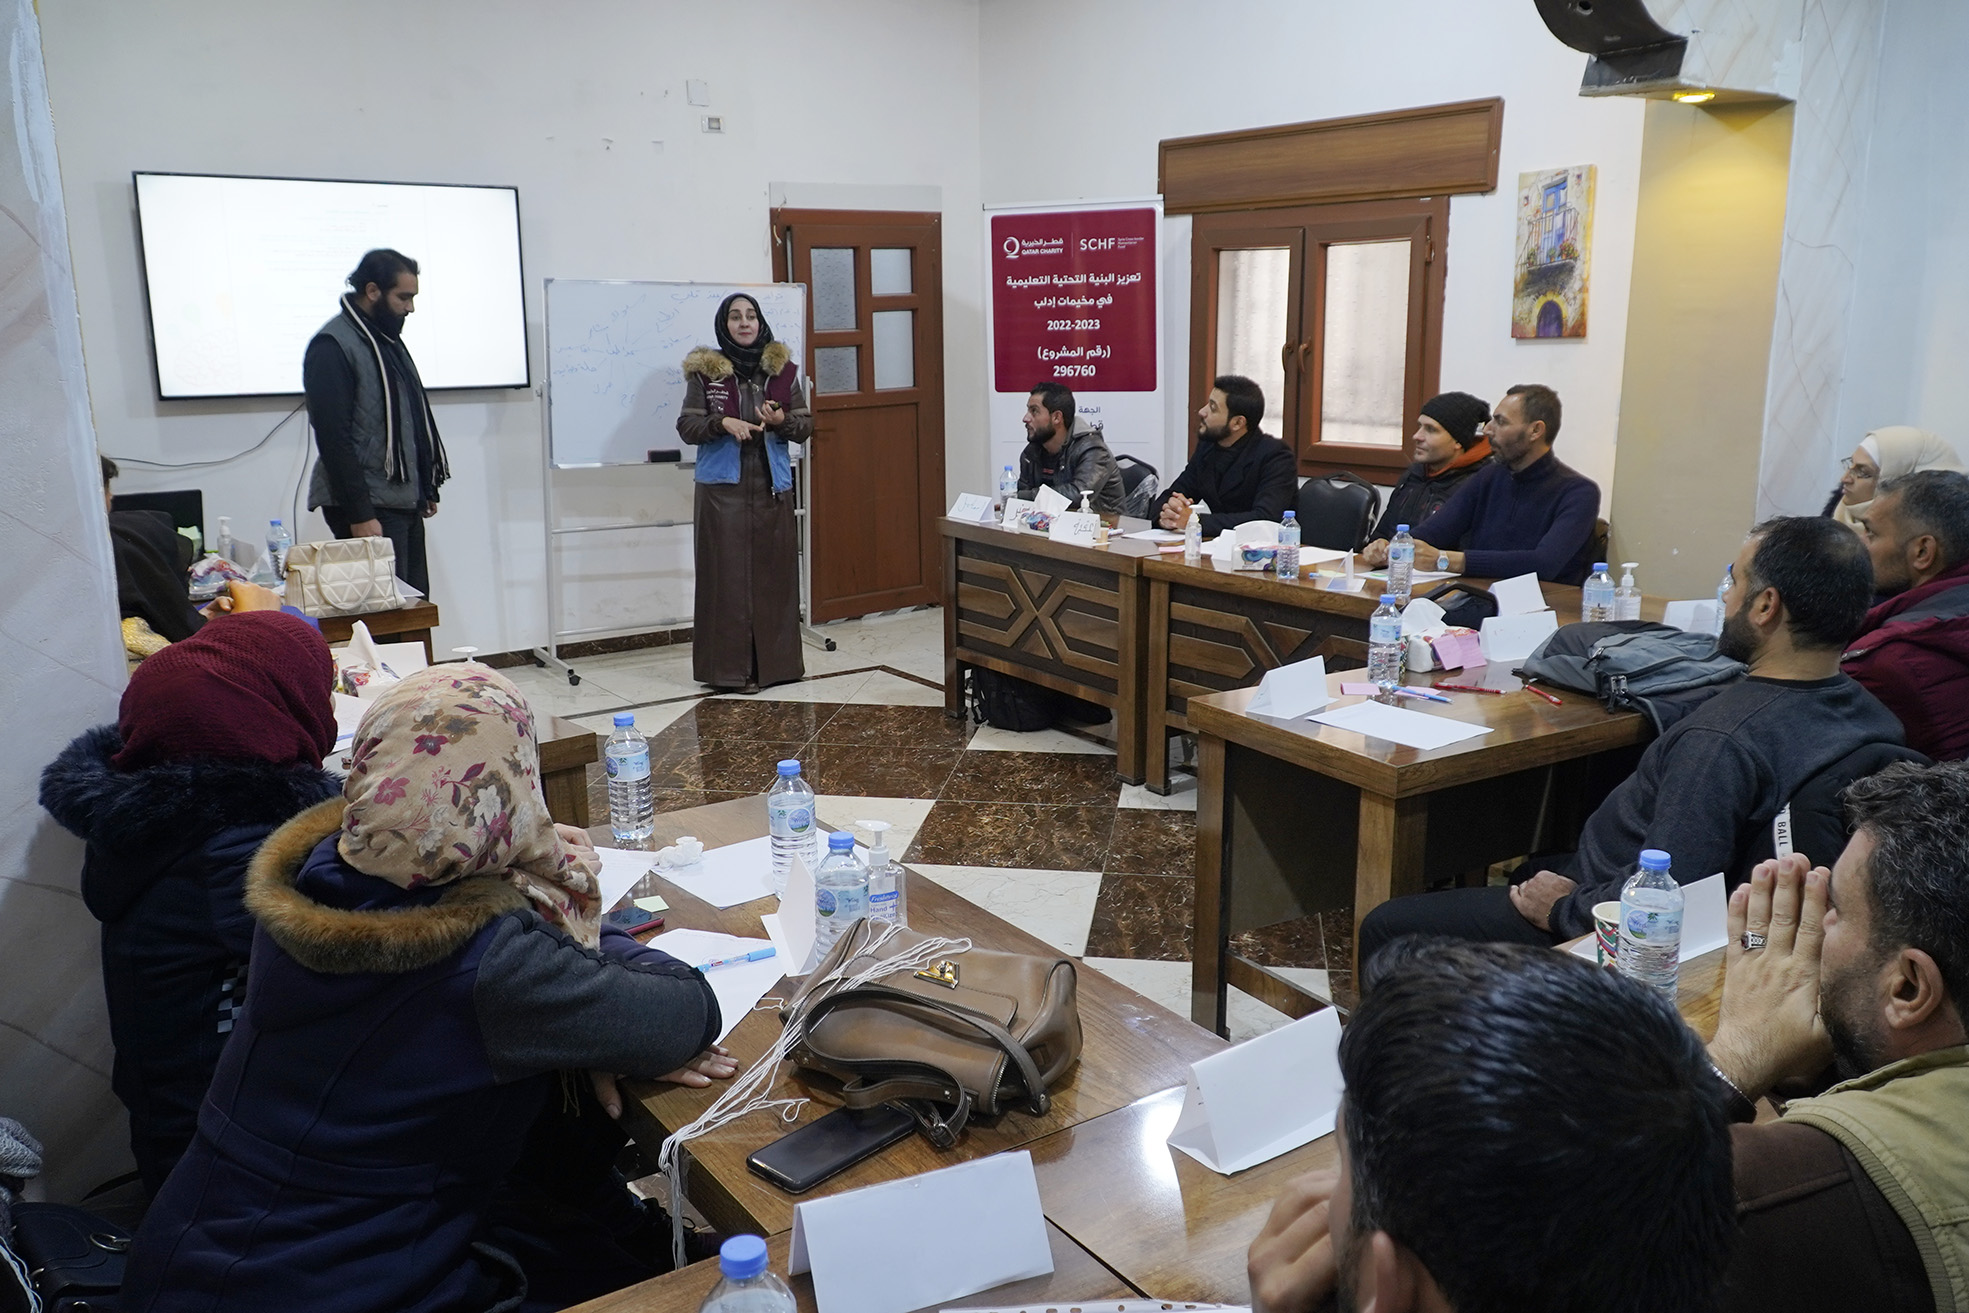 Teachers’ training project revitalizes education in northern Syria